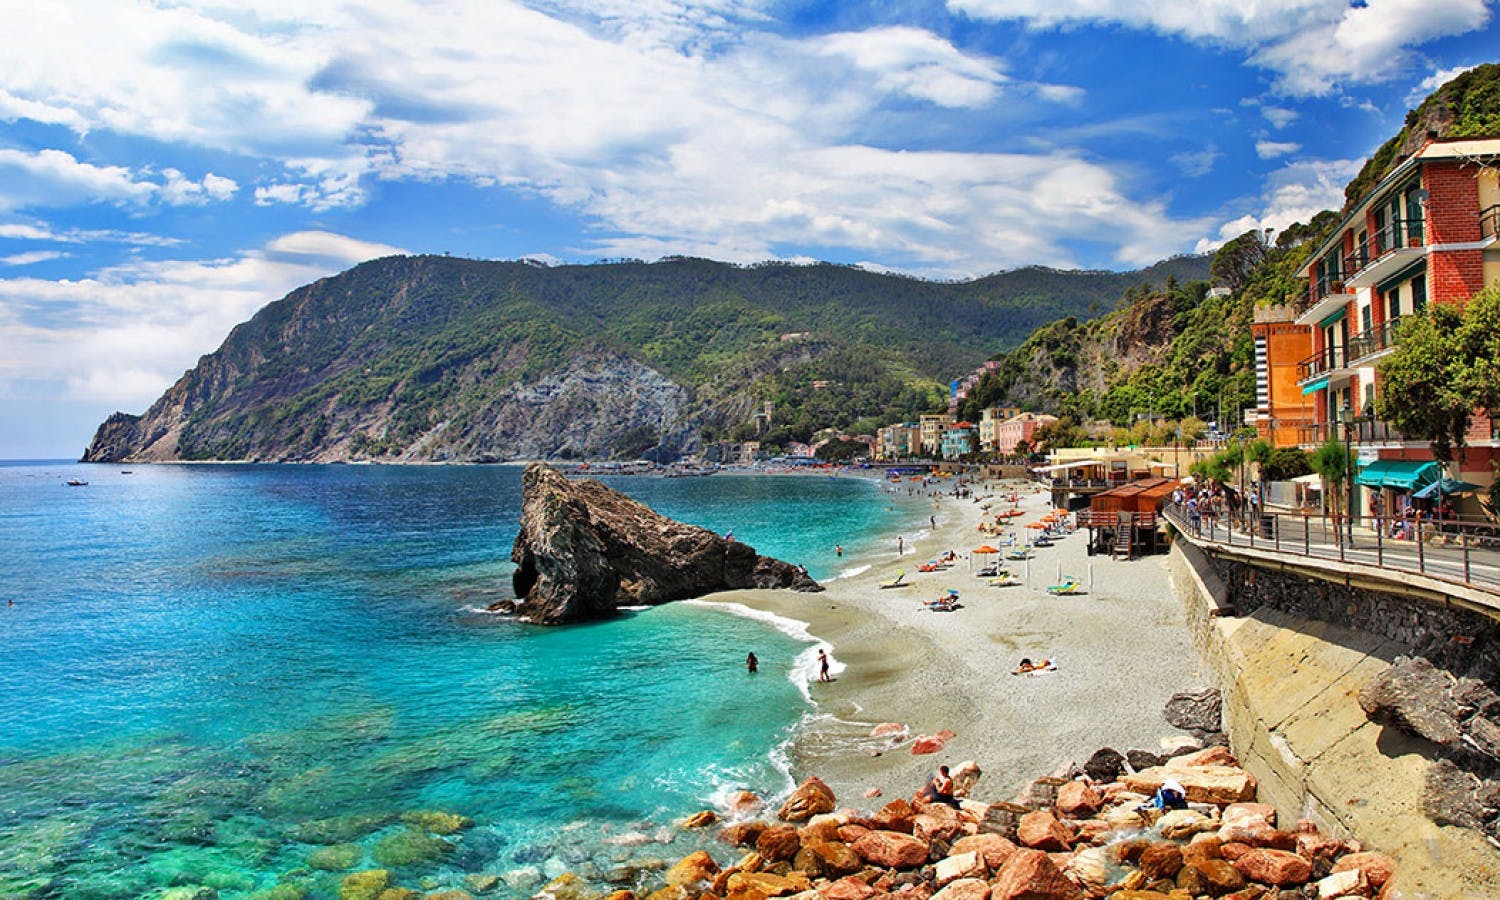 Cinque Terre Day Tour with Limoncino Tasting